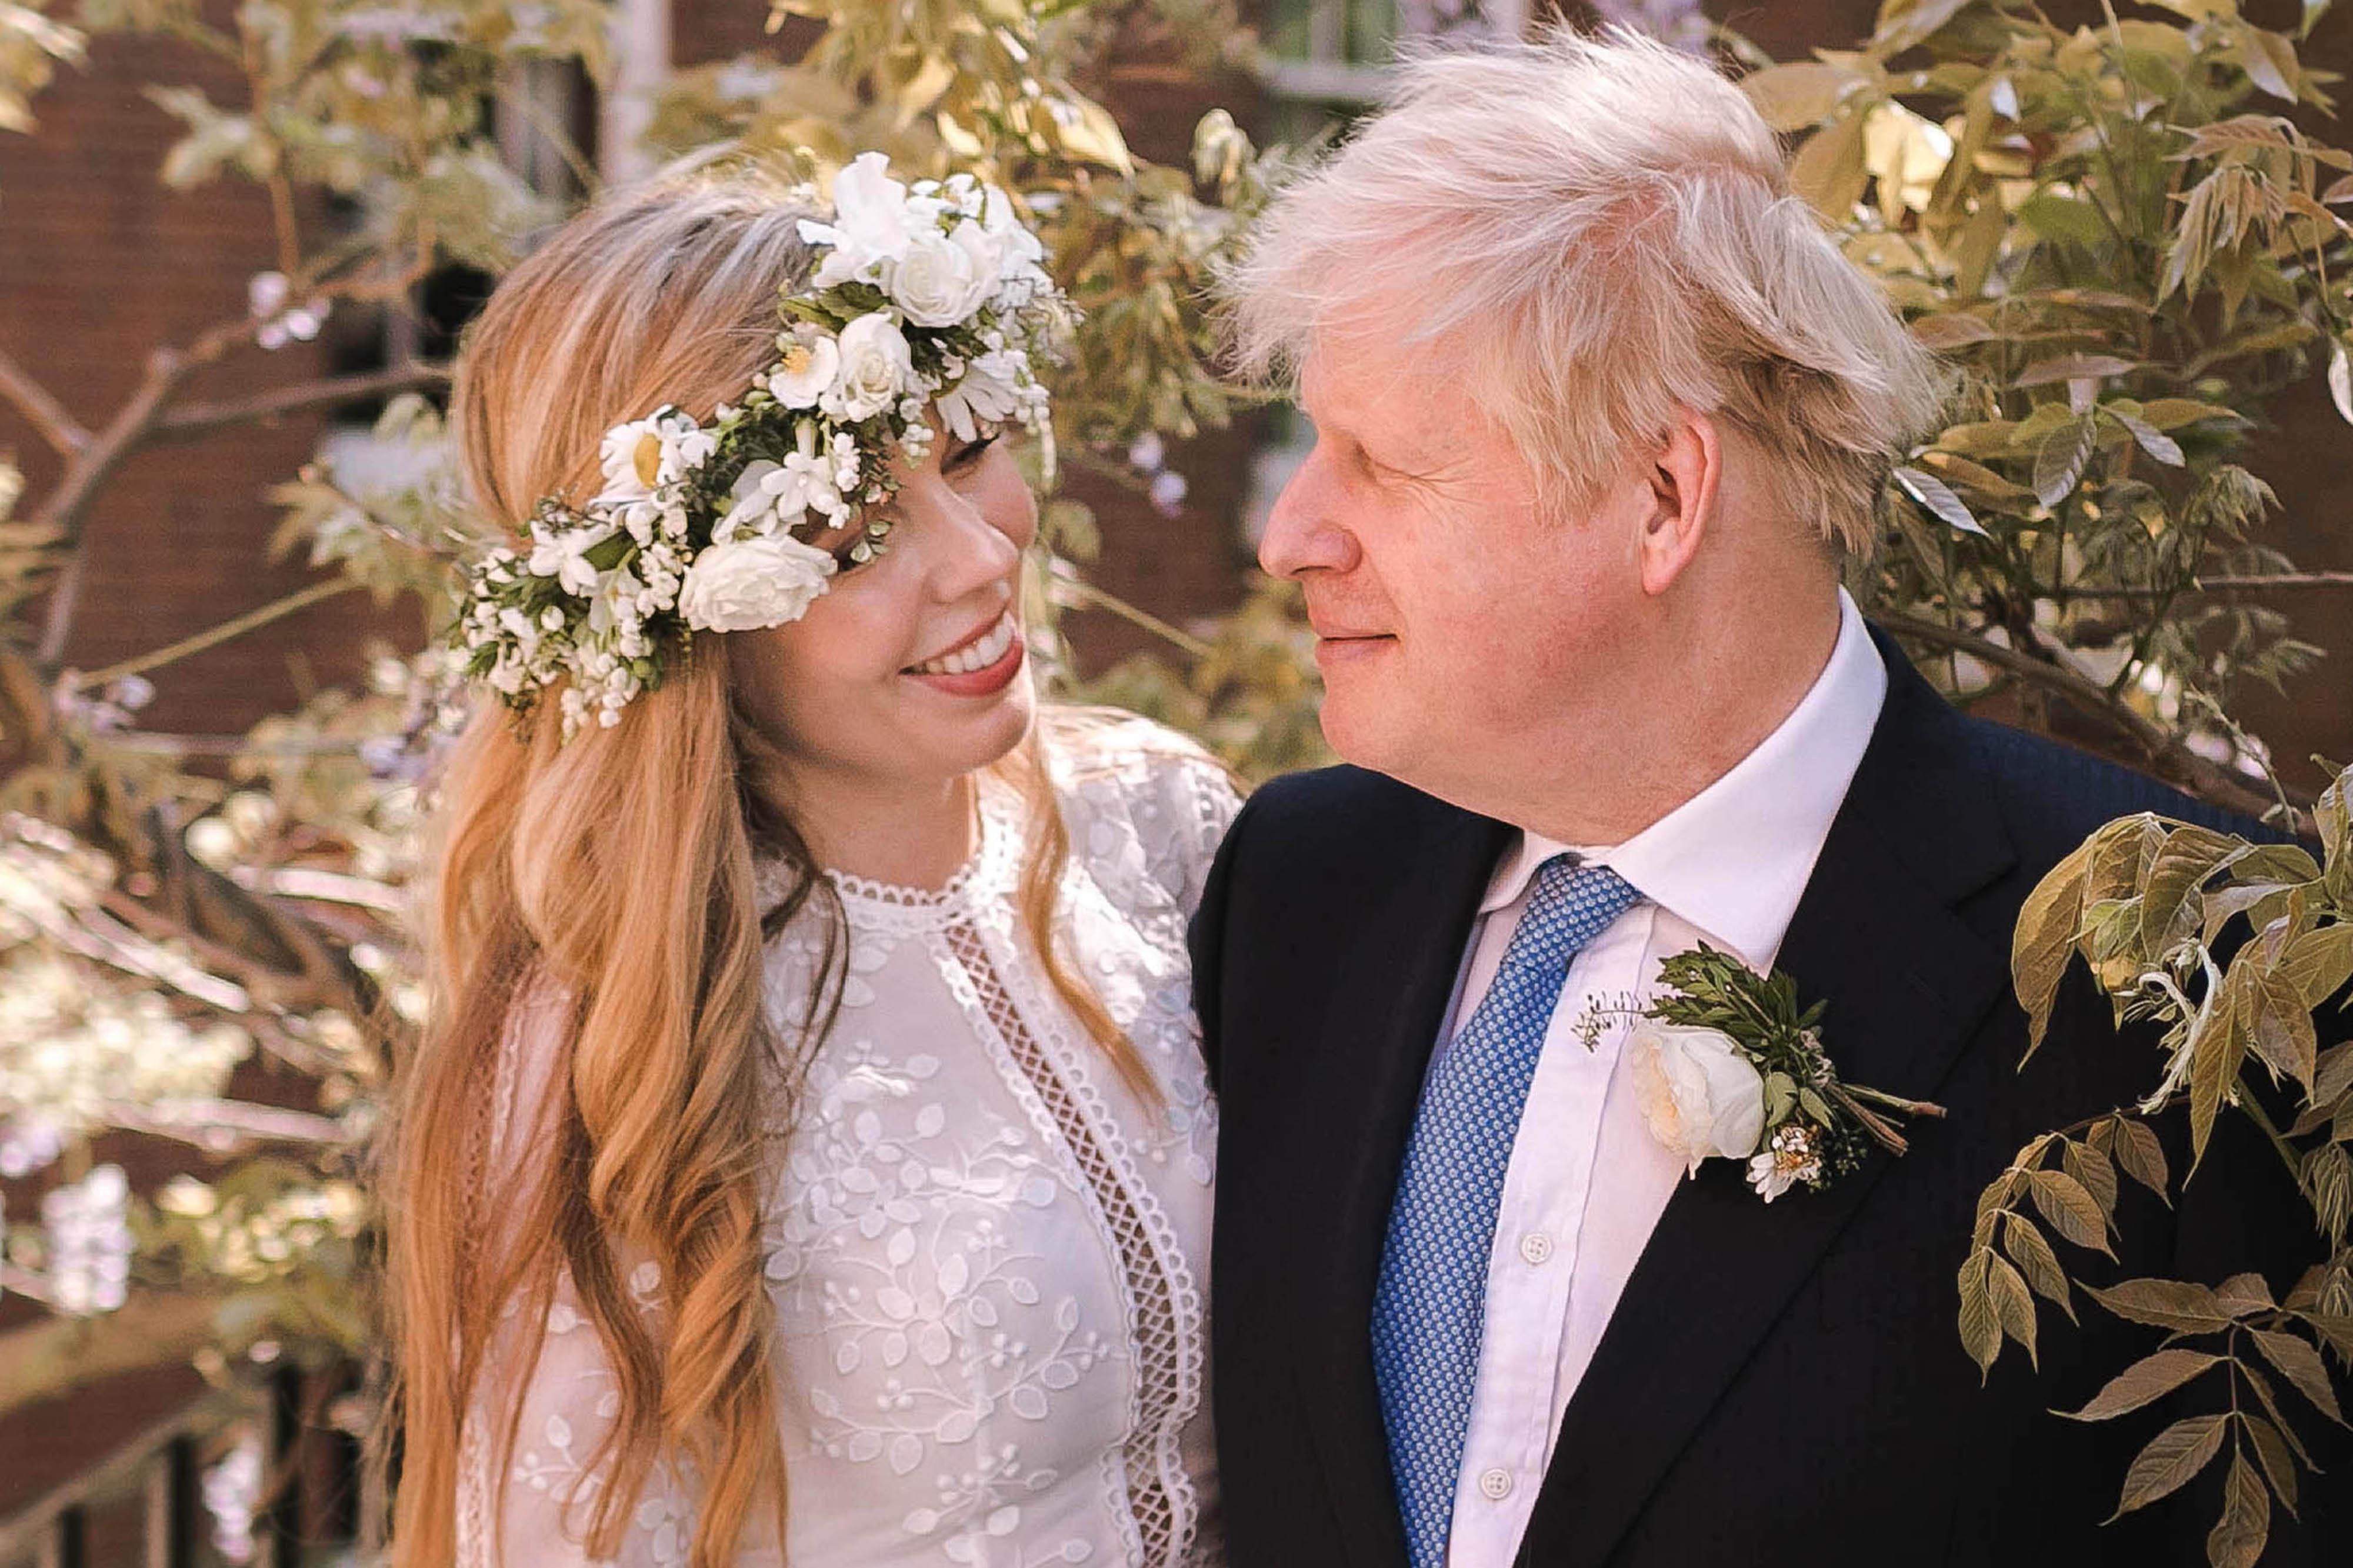 Boris Johnson poses with his wife Carrie Johnson in the garden of 10 Downing Street following their wedding at Westminster Cathedral on May 29, 2021